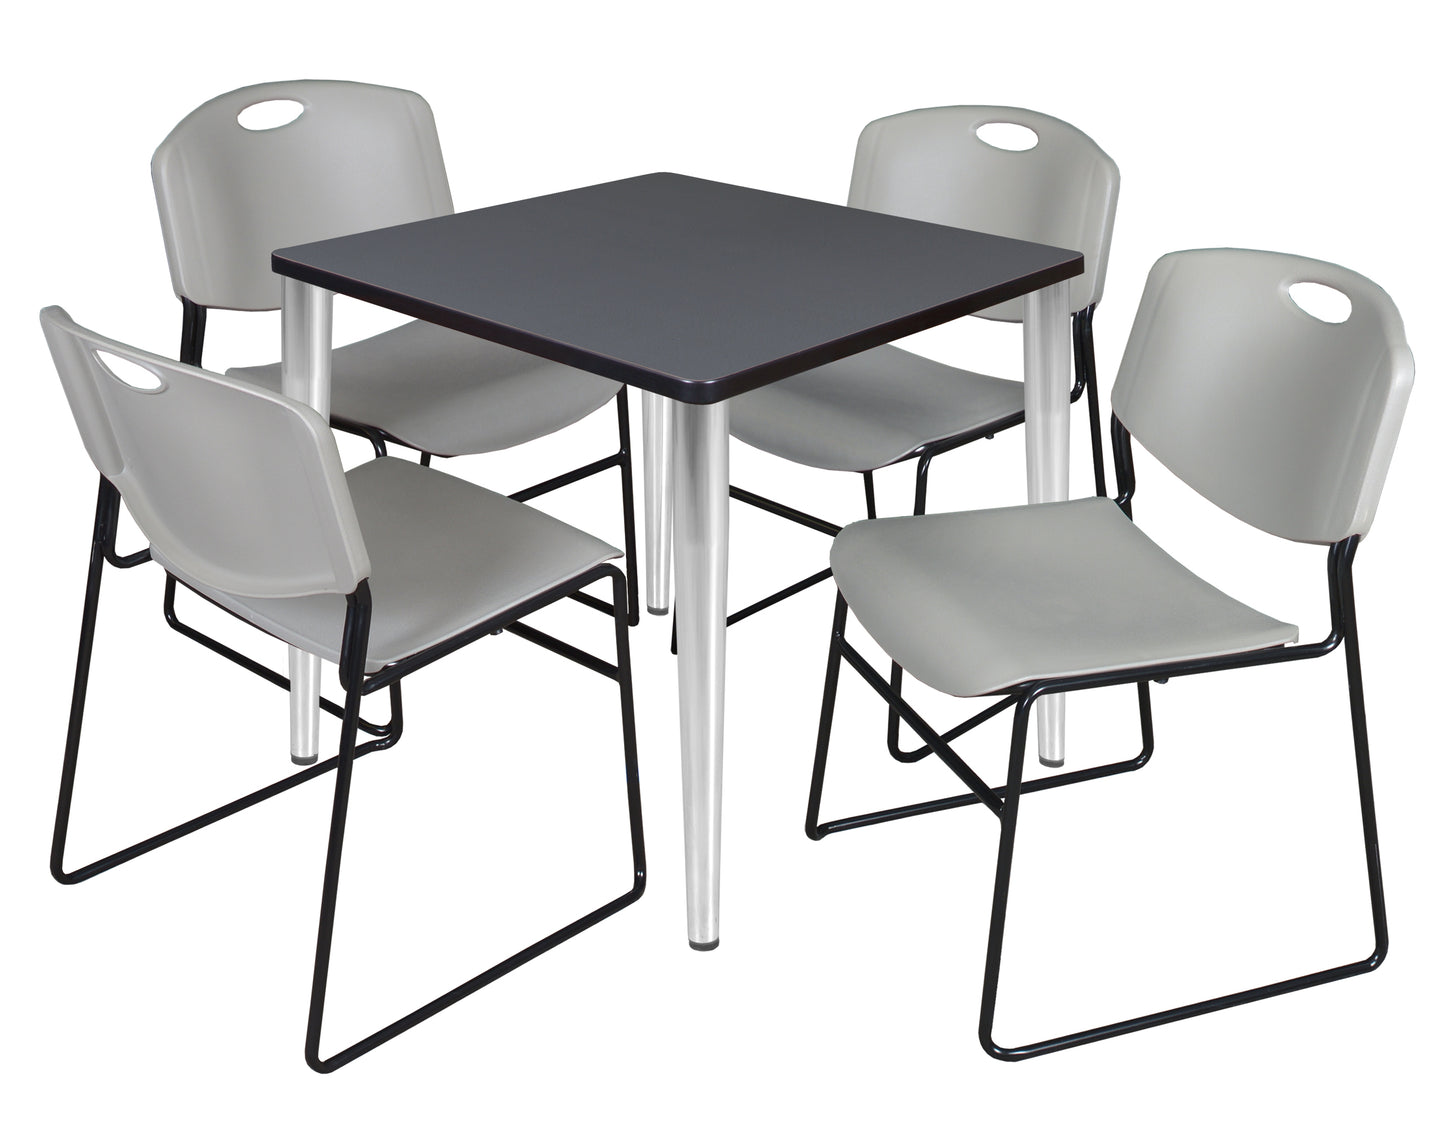 Regency Kahlo 30 in. Square Breakroom Table & 4 Zeng Stack Chairs